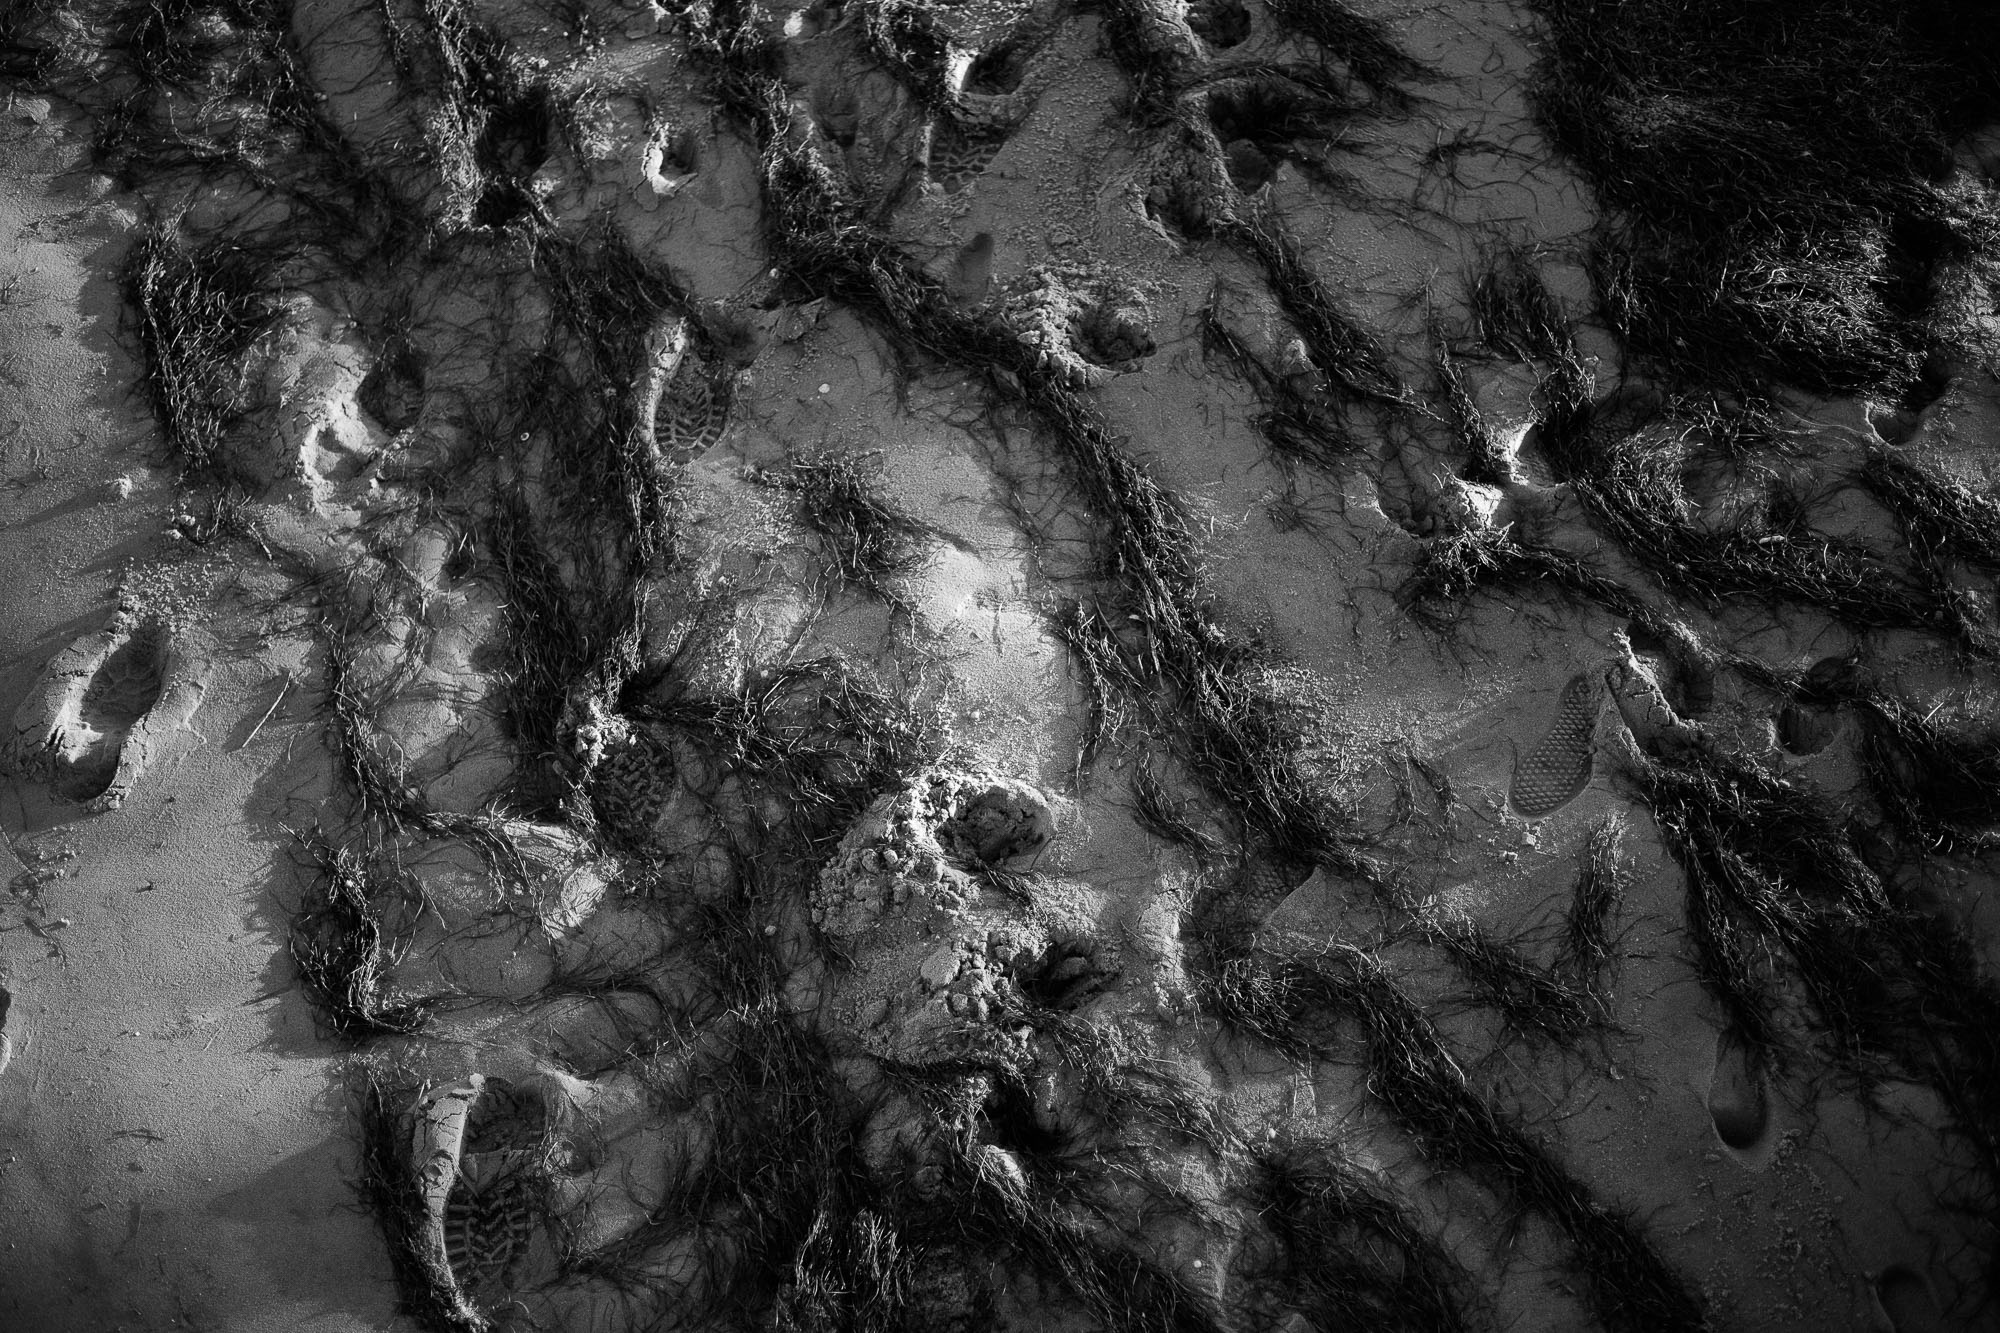 footprints and seaweed on sand in high contrast image